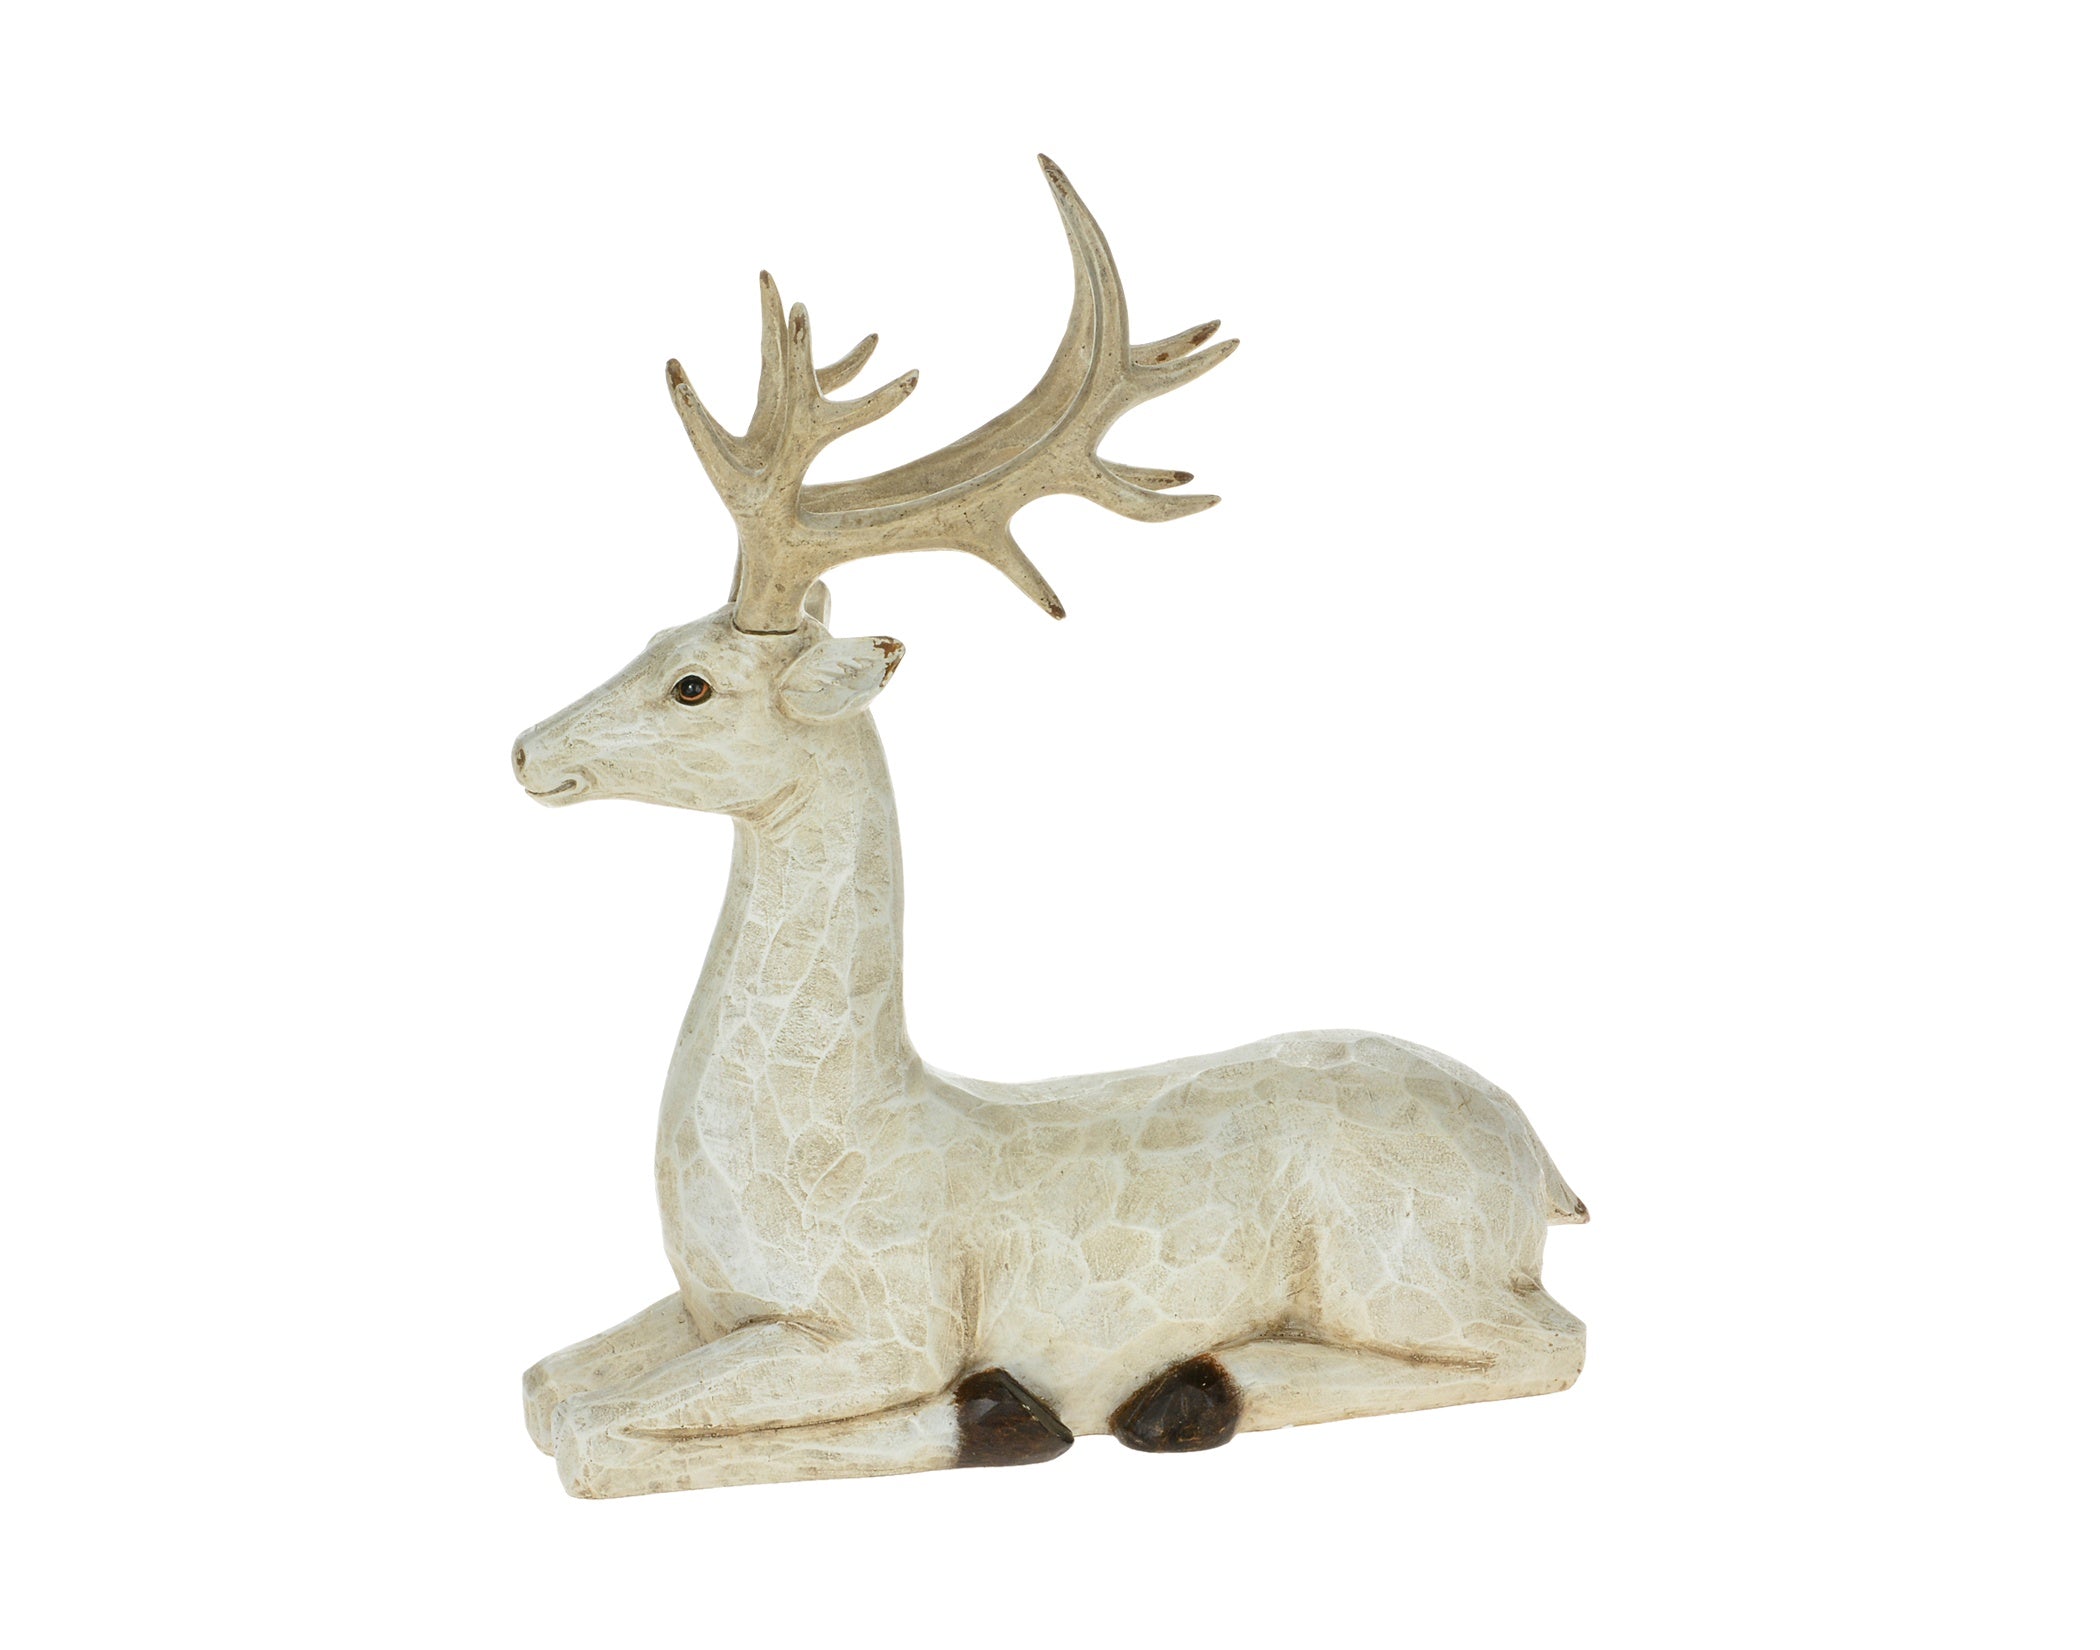 Sitting Reindeer with Attachable Antlers